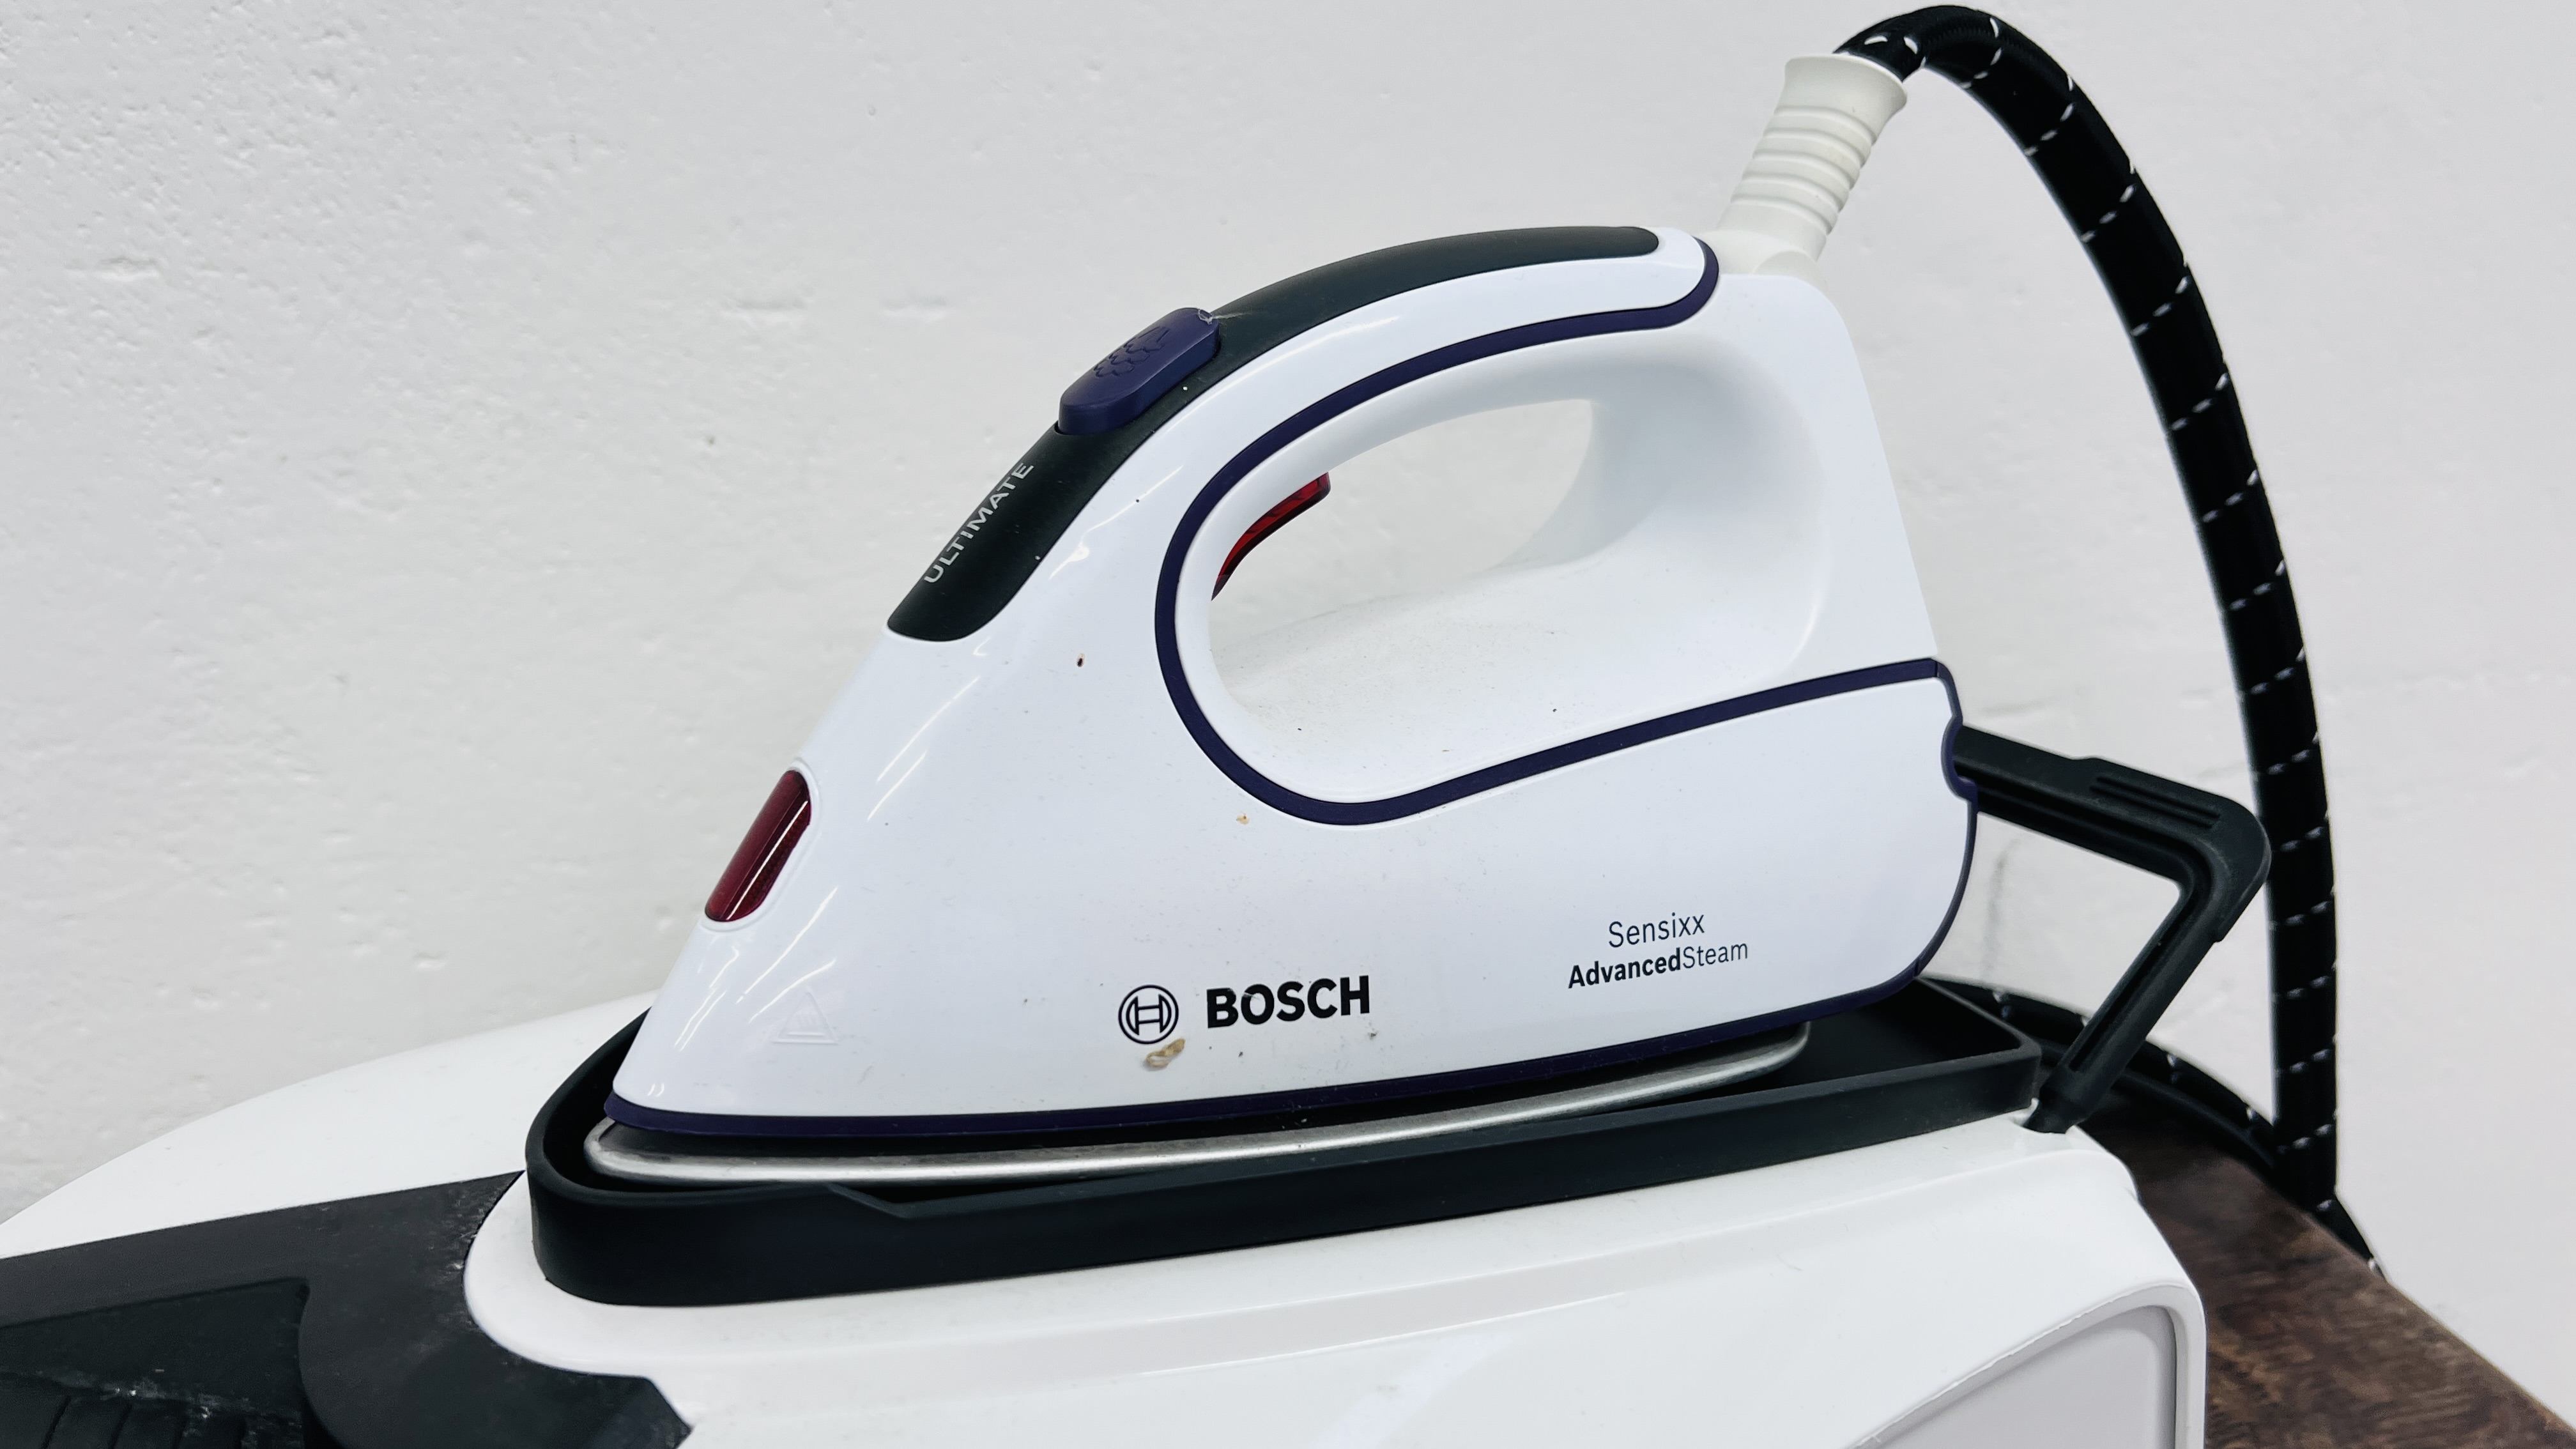 BOSCH SENSIXX B22L STEAM IRON WITH OPERATING INSTRUCTIONS - SOLD AS SEEN. - Image 2 of 6